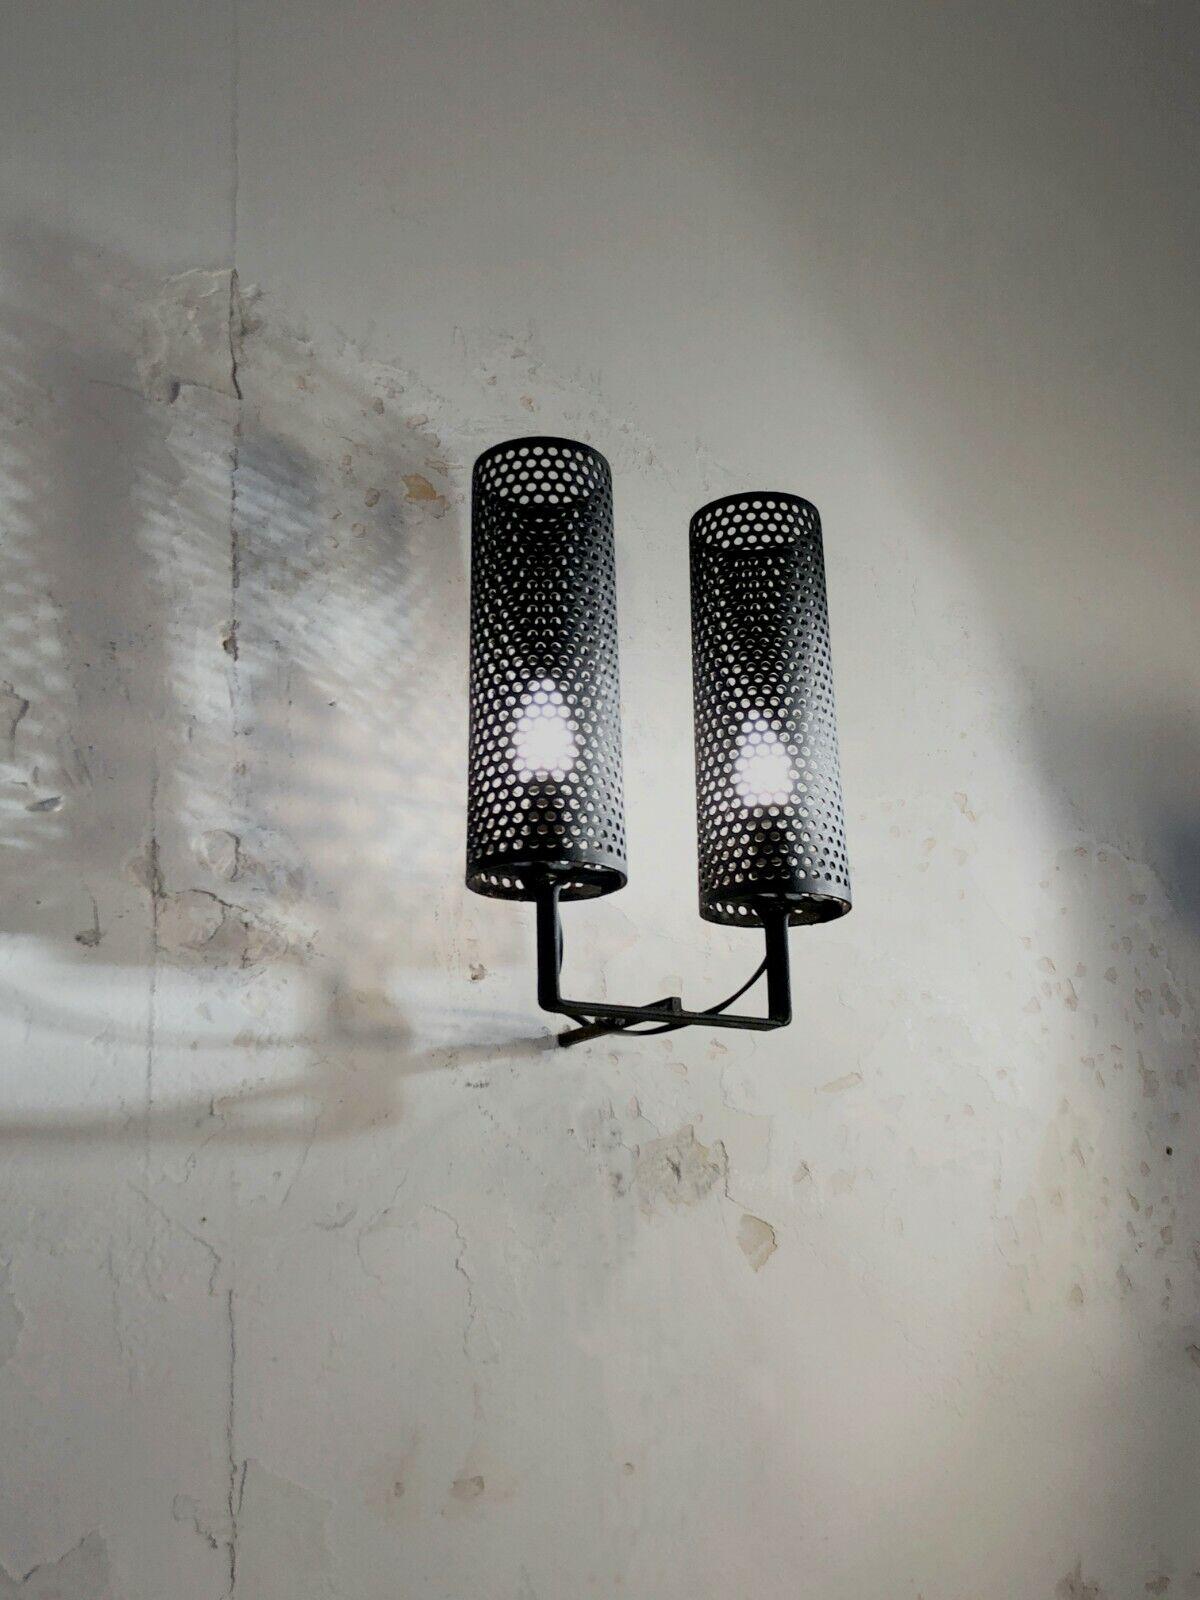 A wall lamp with 2 arms of light, Modernist, Bauhaus, Constructivist, Free Form, in thick black and perforated ironwork, in the style of Mathieu Matégot, to be attributed, France 1950.
Exceptional manufacturing quality.
The wall light can literally